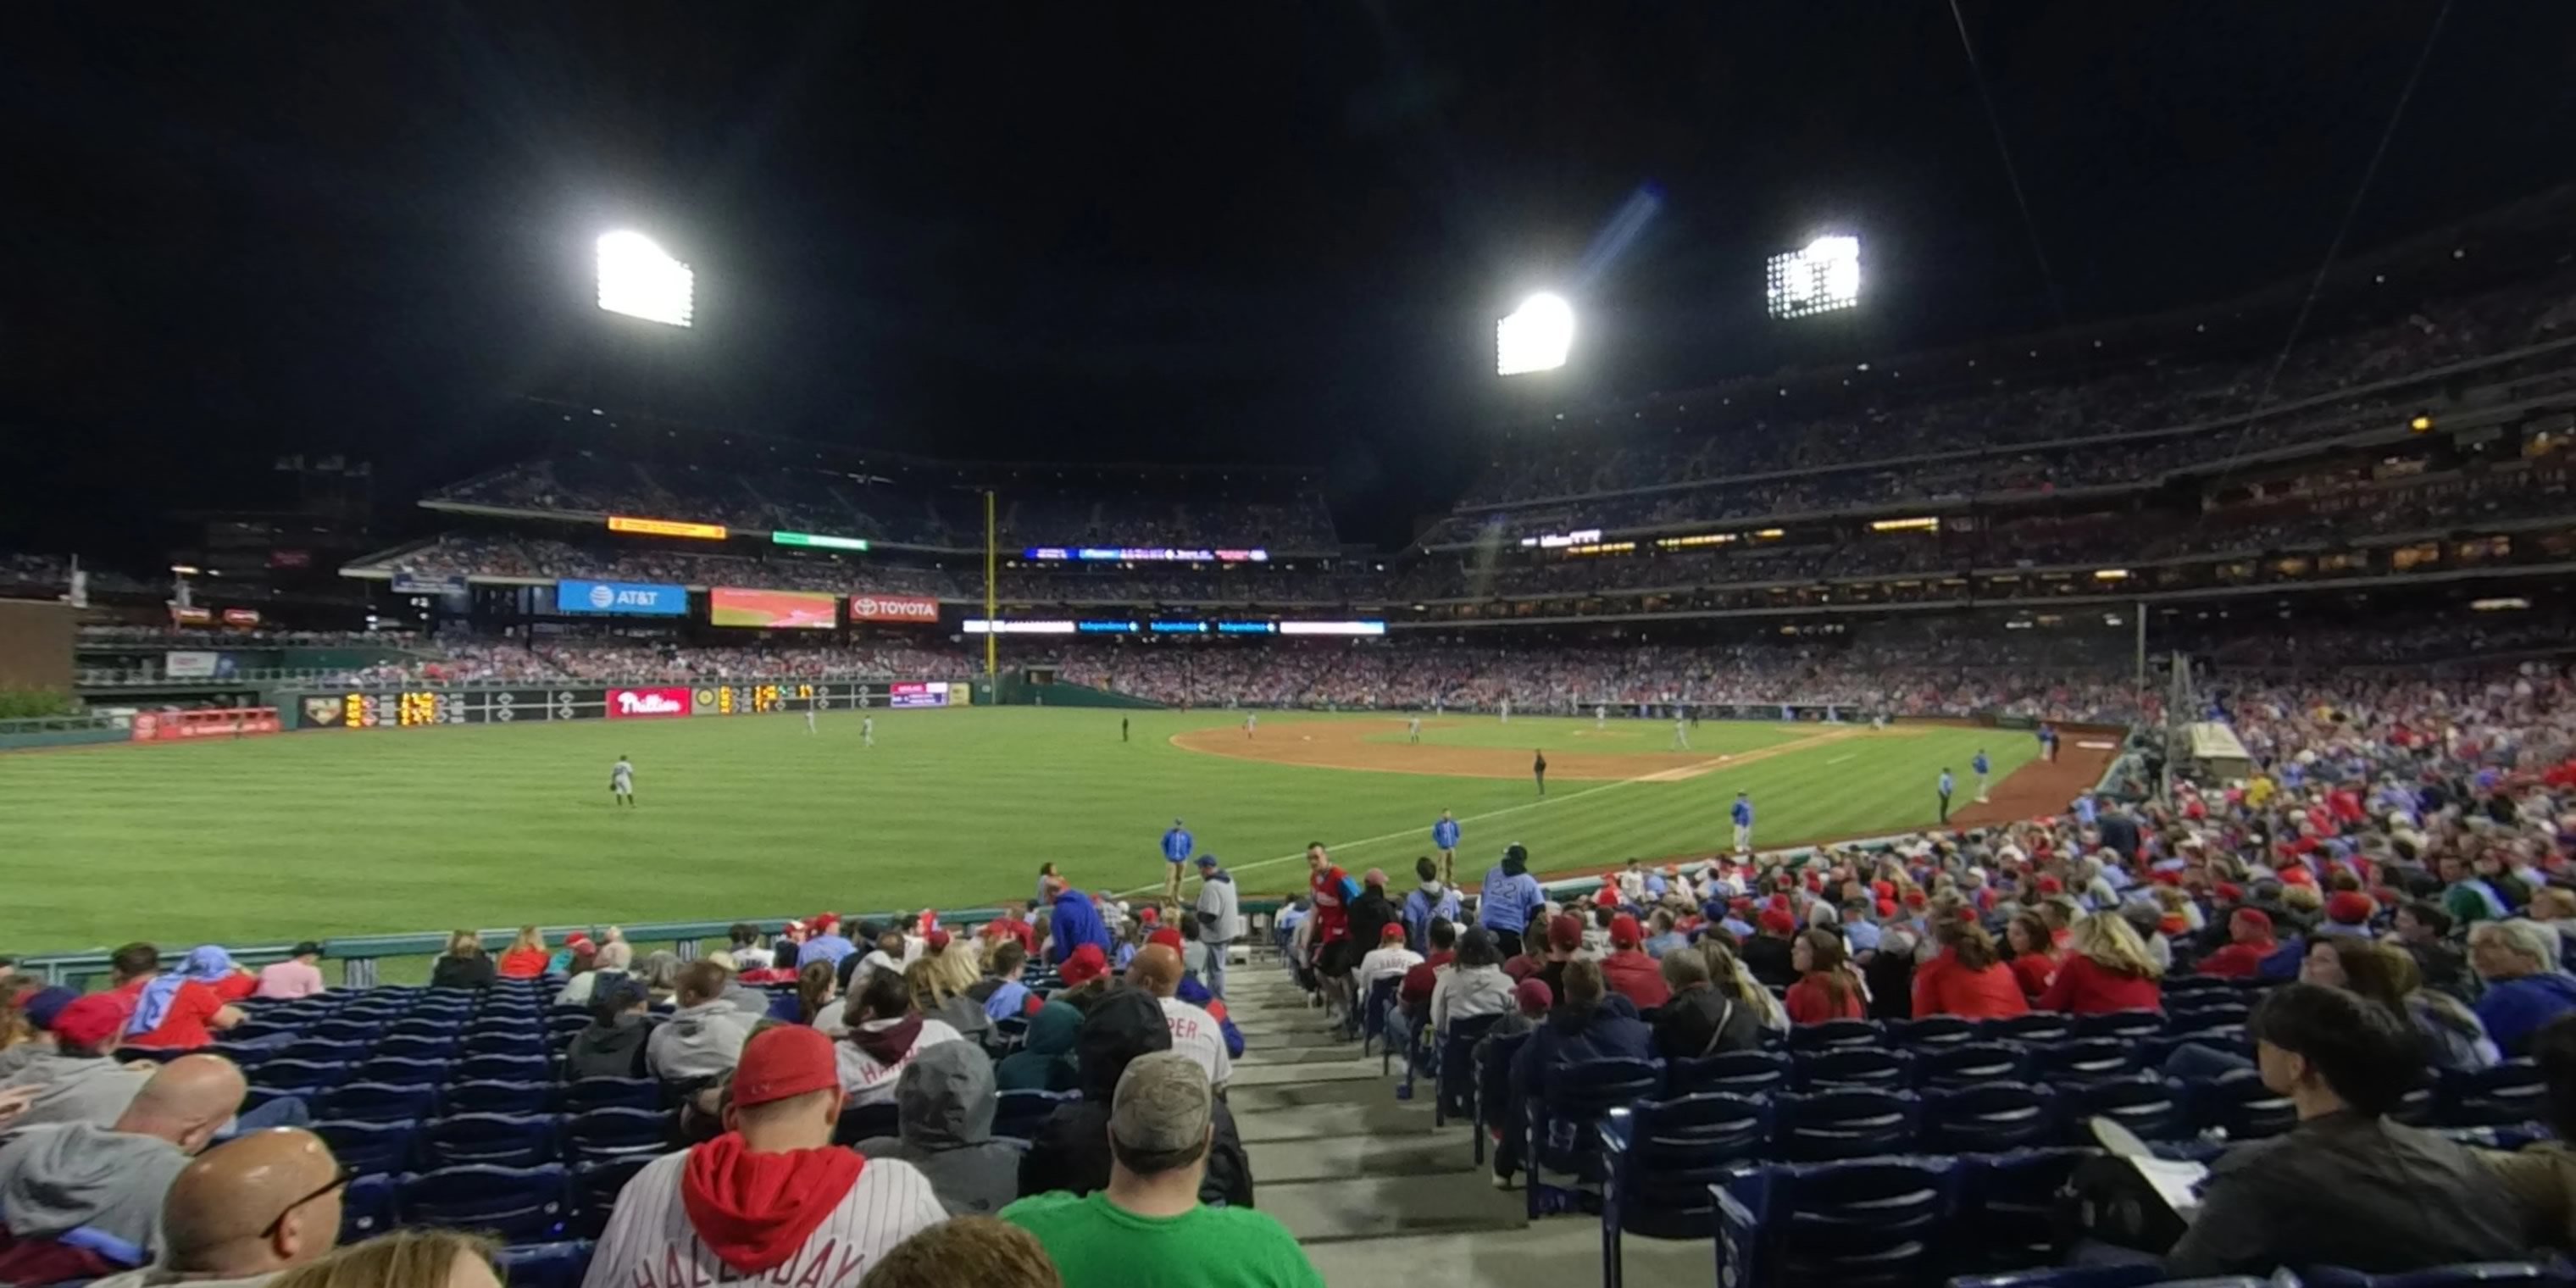 section 136 panoramic seat view  for baseball - citizens bank park